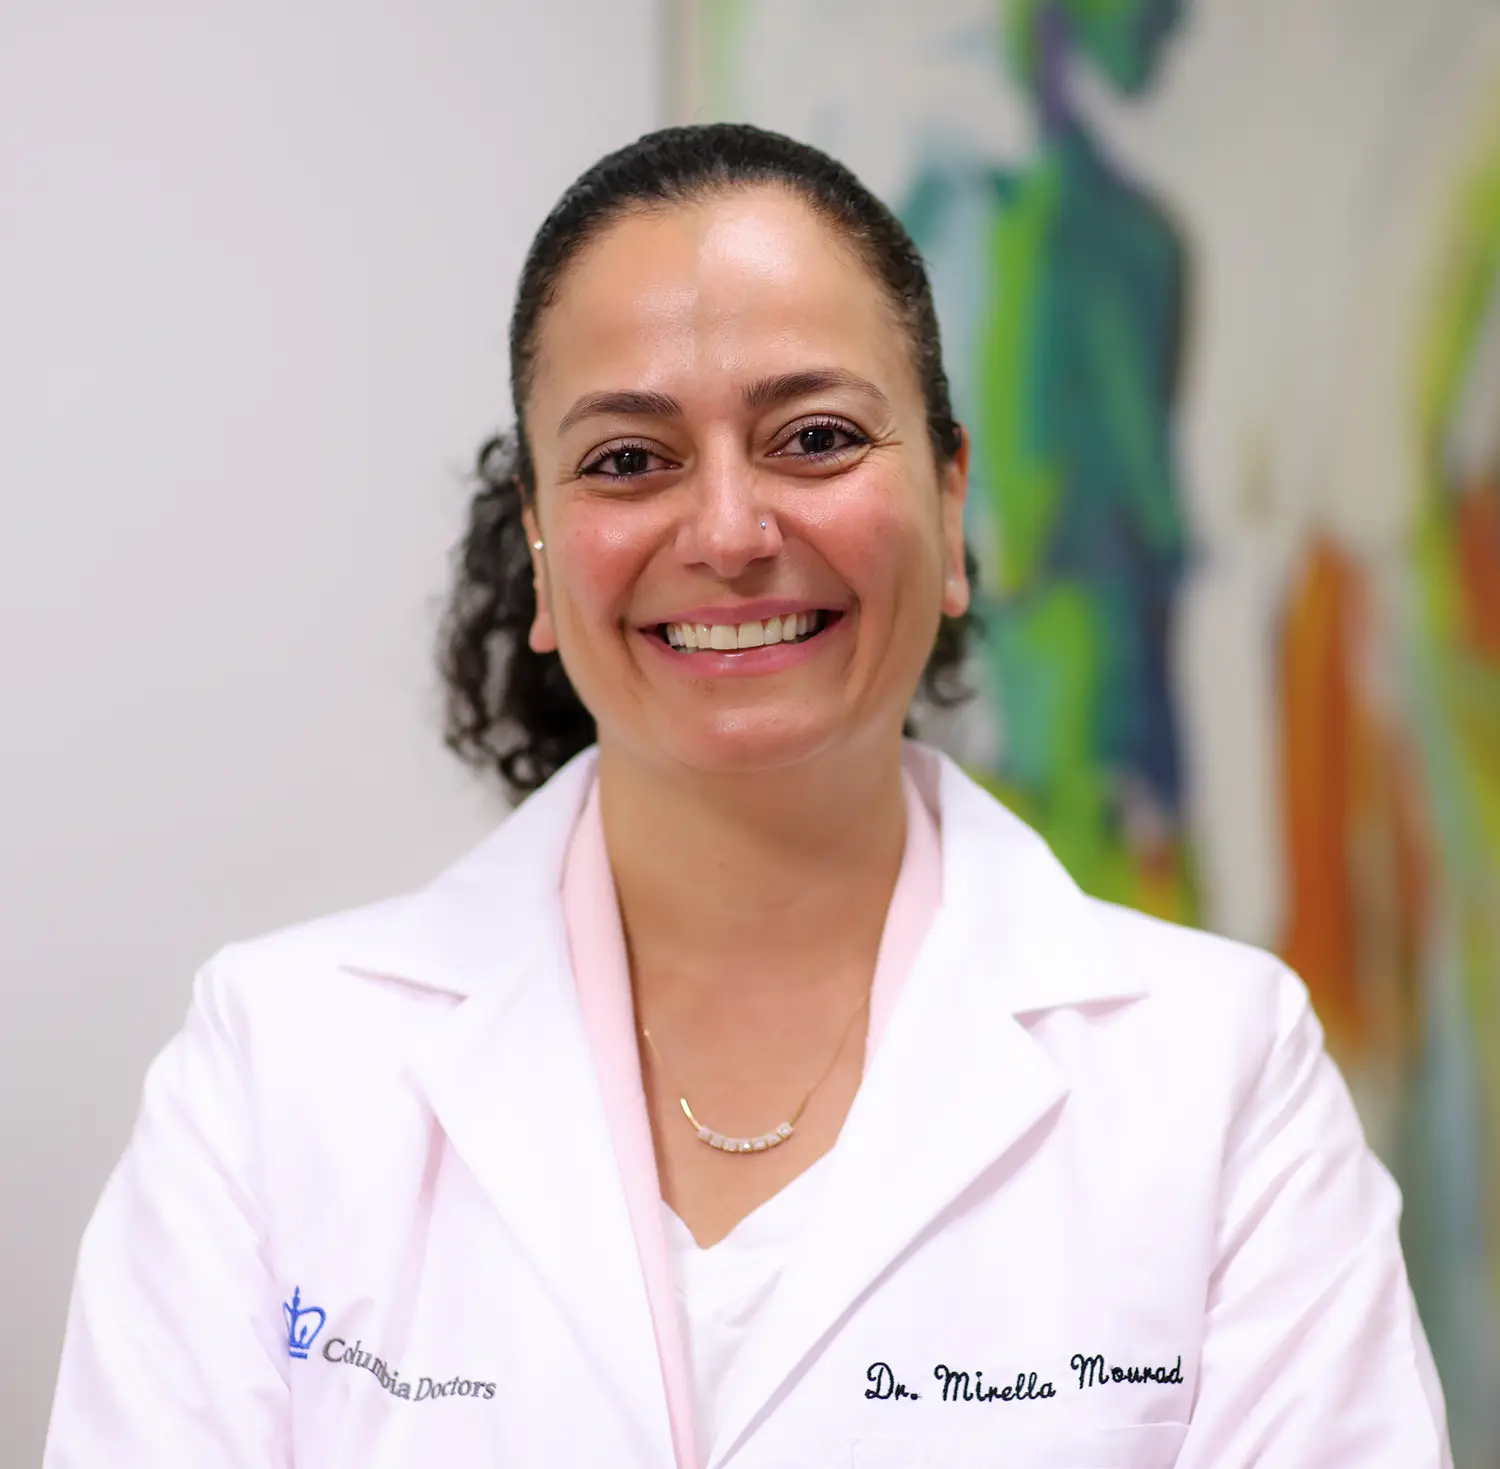 Mirella Mourad, MD, Director of the Mothers Center and Co-director of the Placenta Accreta Spectrum program